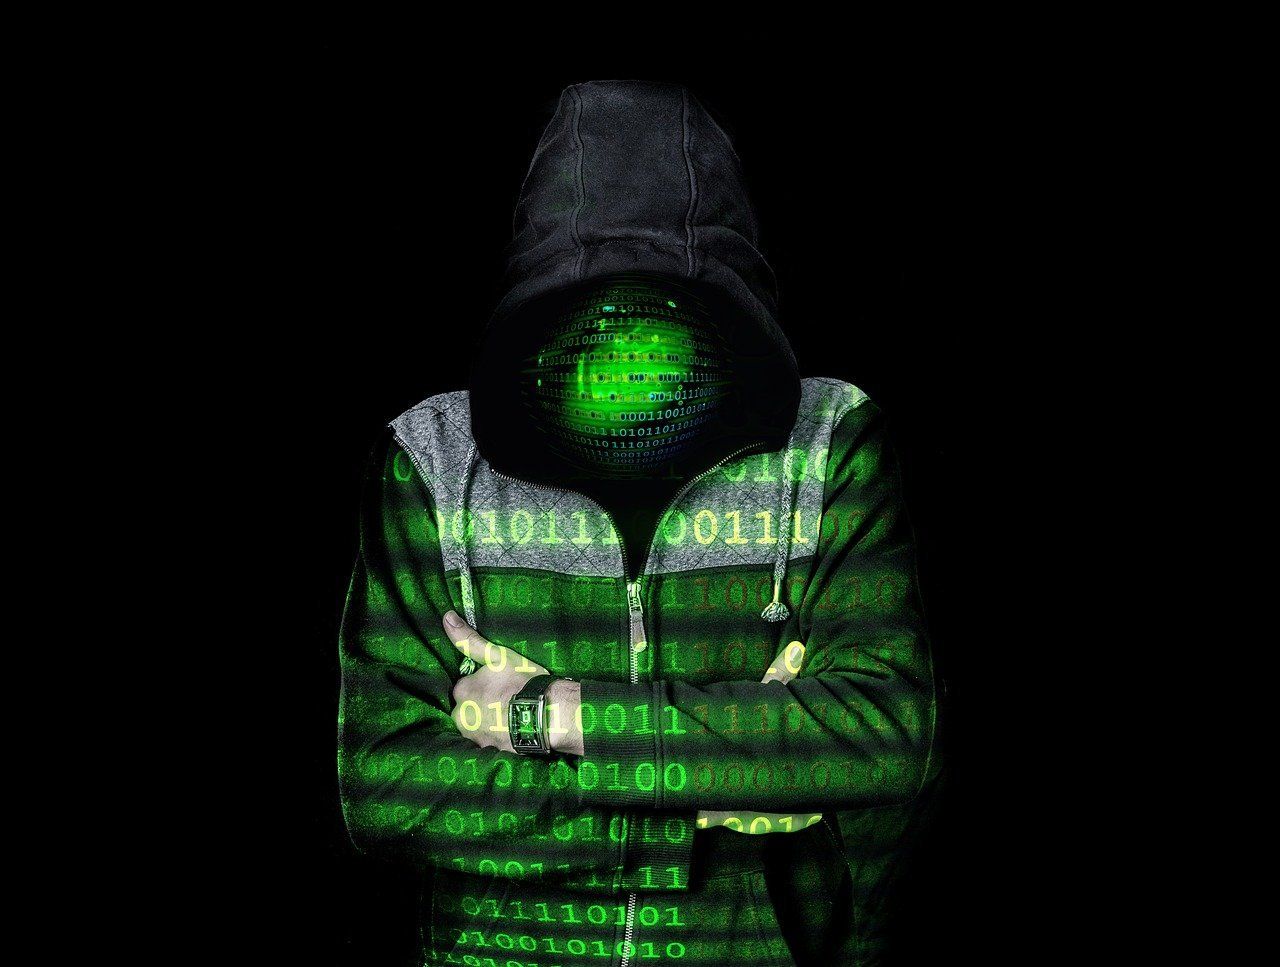 Image of an ominous looking person covered in binary code